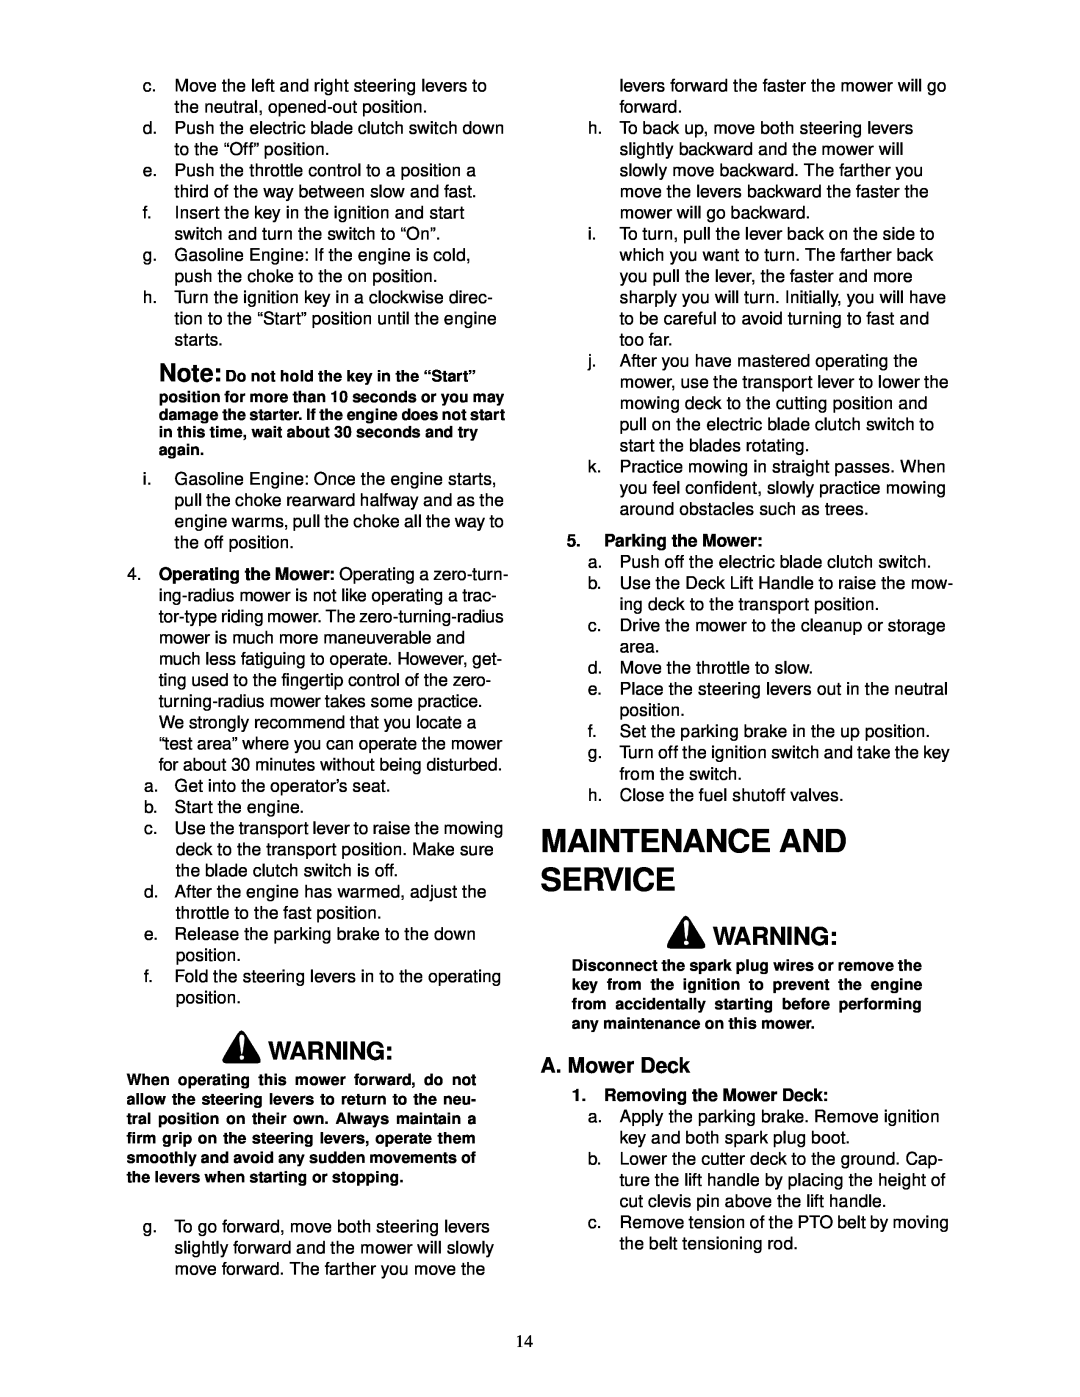 Cub Cadet 18HP service manual Maintenance And Service, A. Mower Deck, Parking the Mower, Removing the Mower Deck 